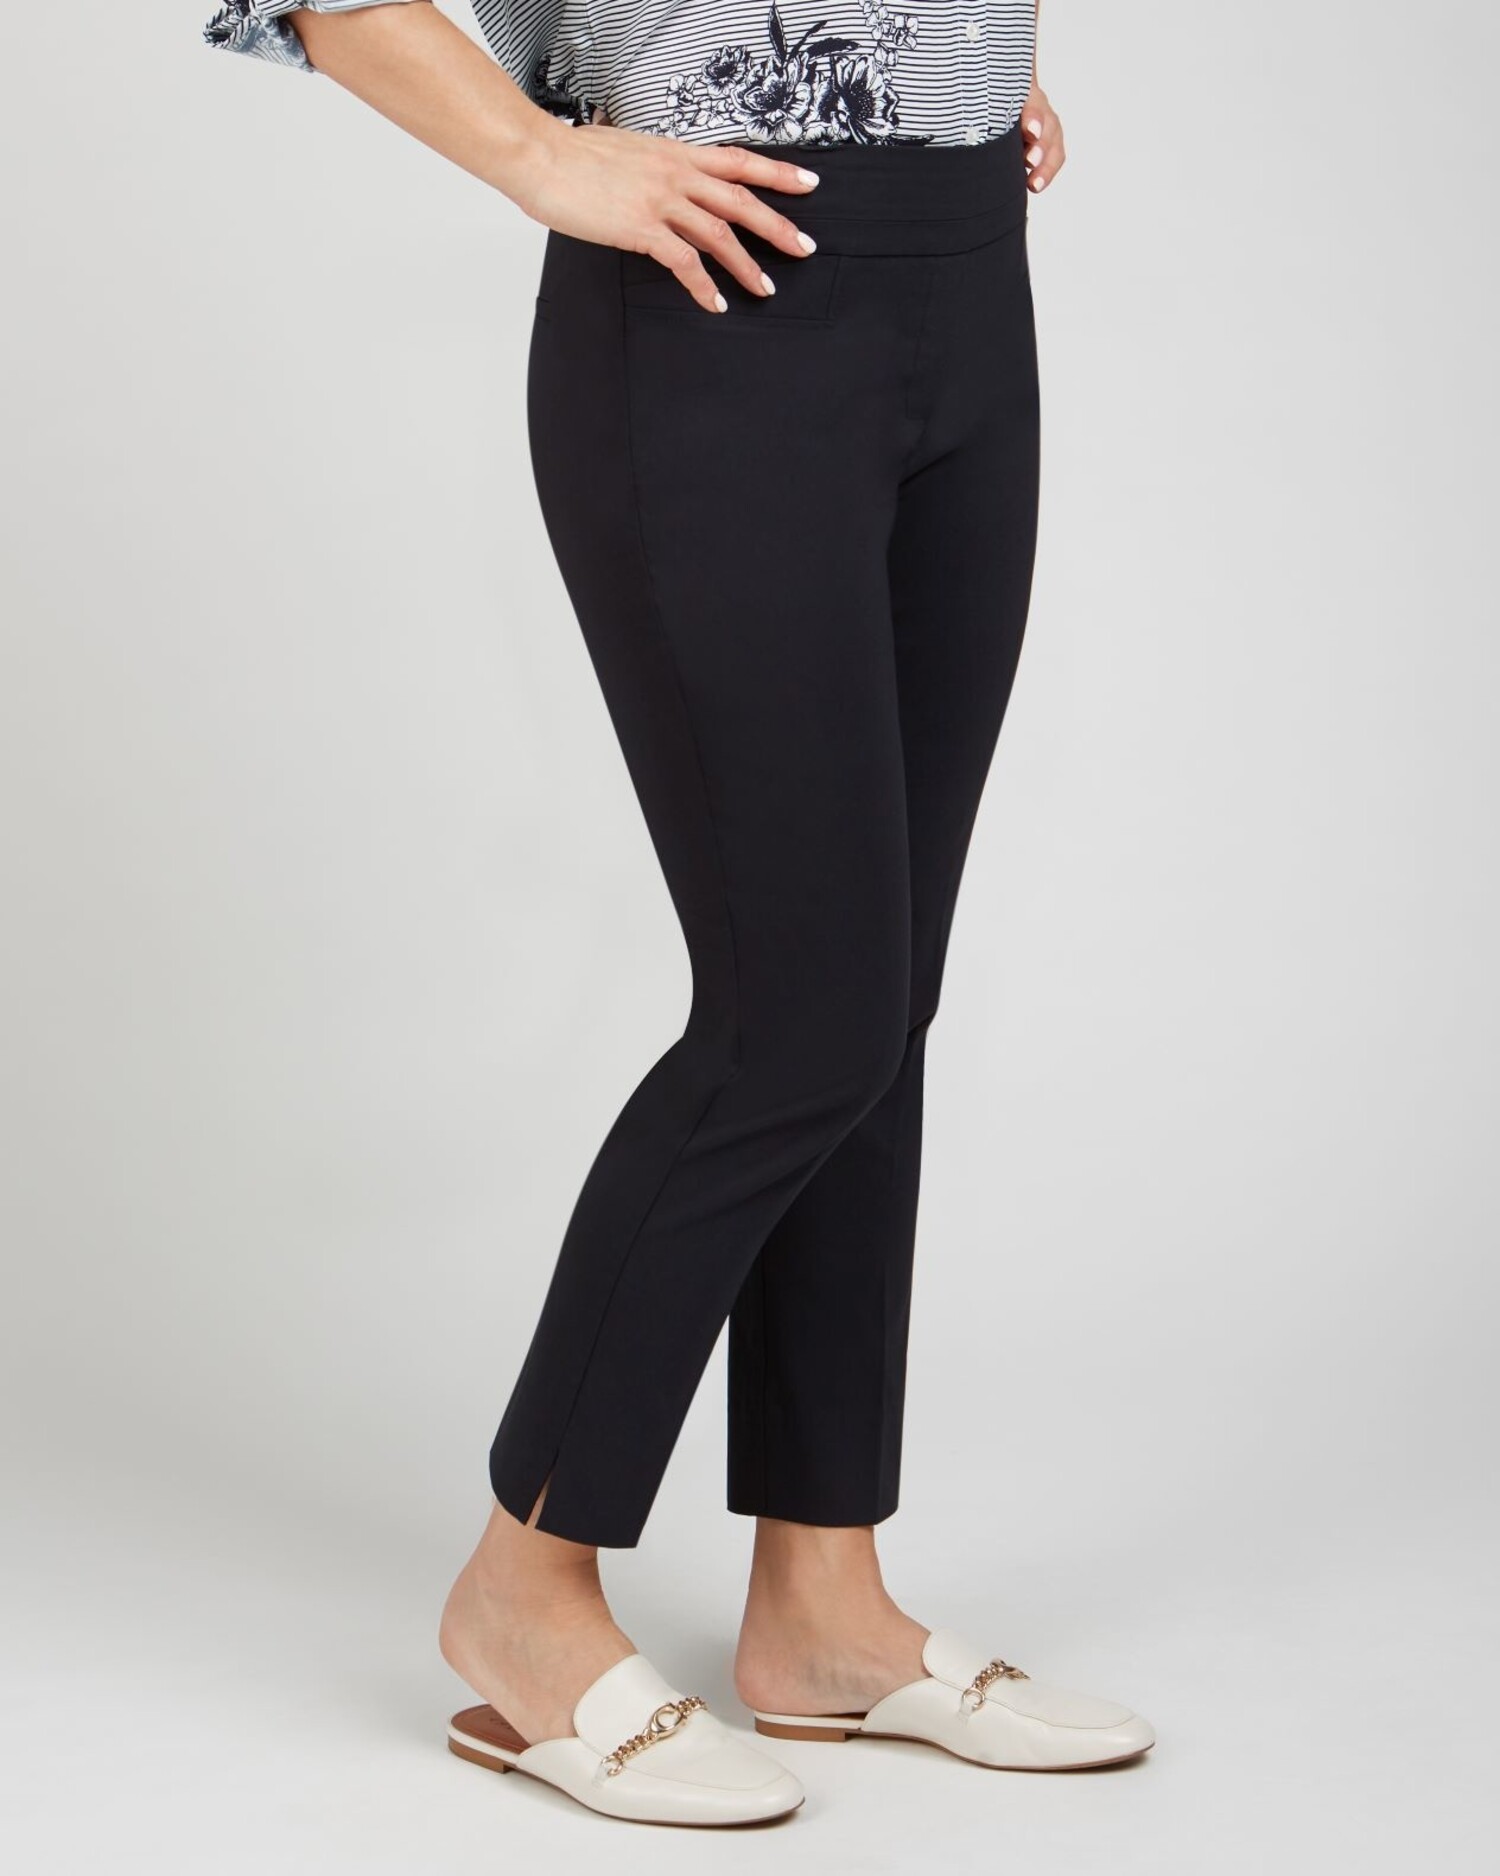 Women's Conceal Carry Full-length Leggings/Pants Just Above Ankle